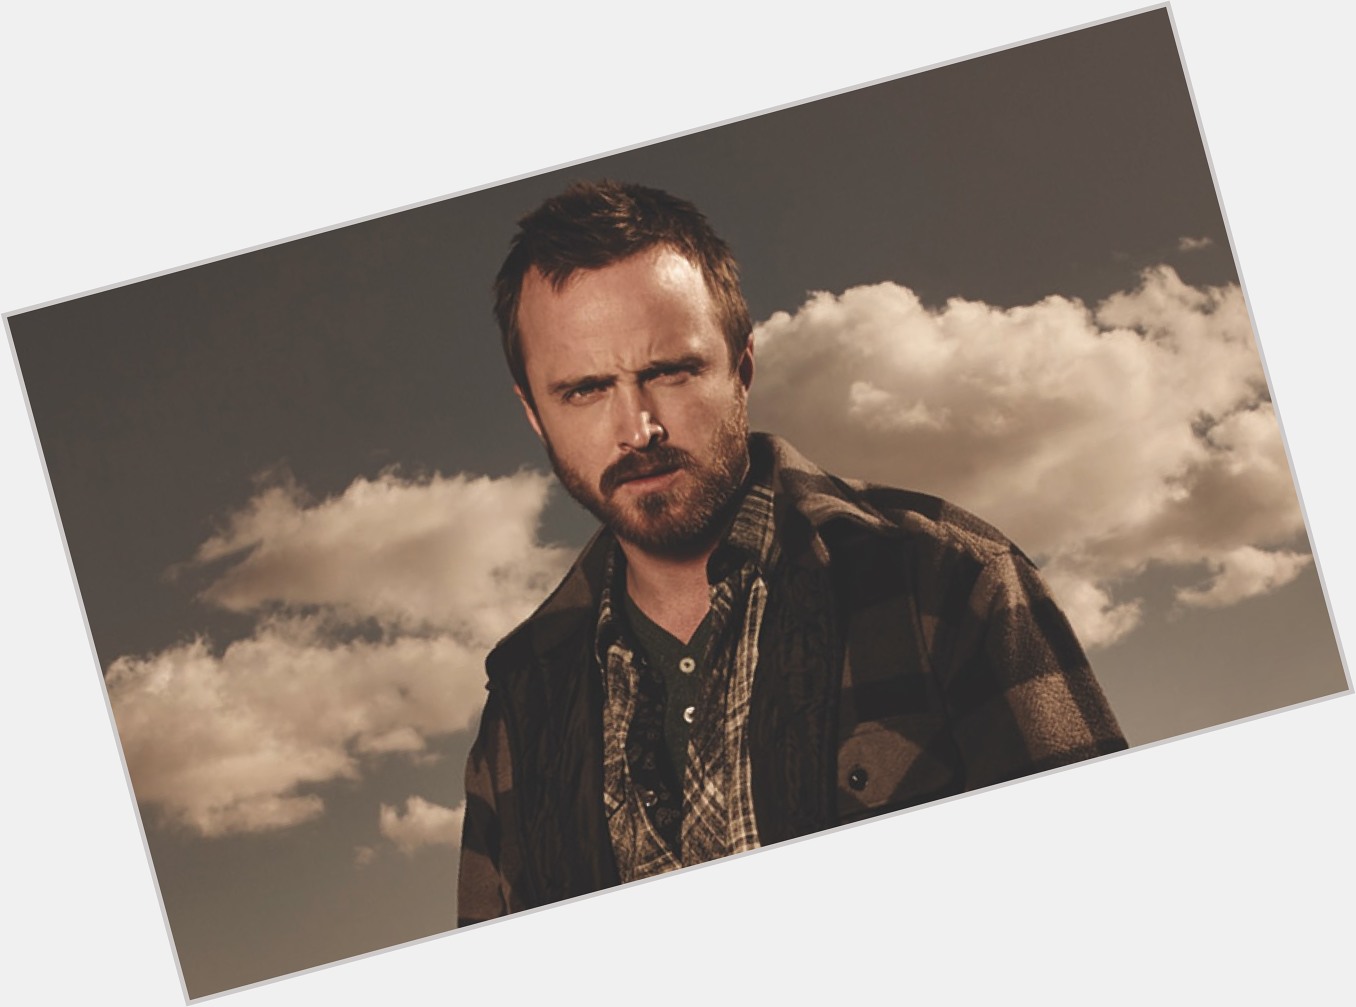 Happy birthday Aaron Paul! Cant believe this bitch is 41 